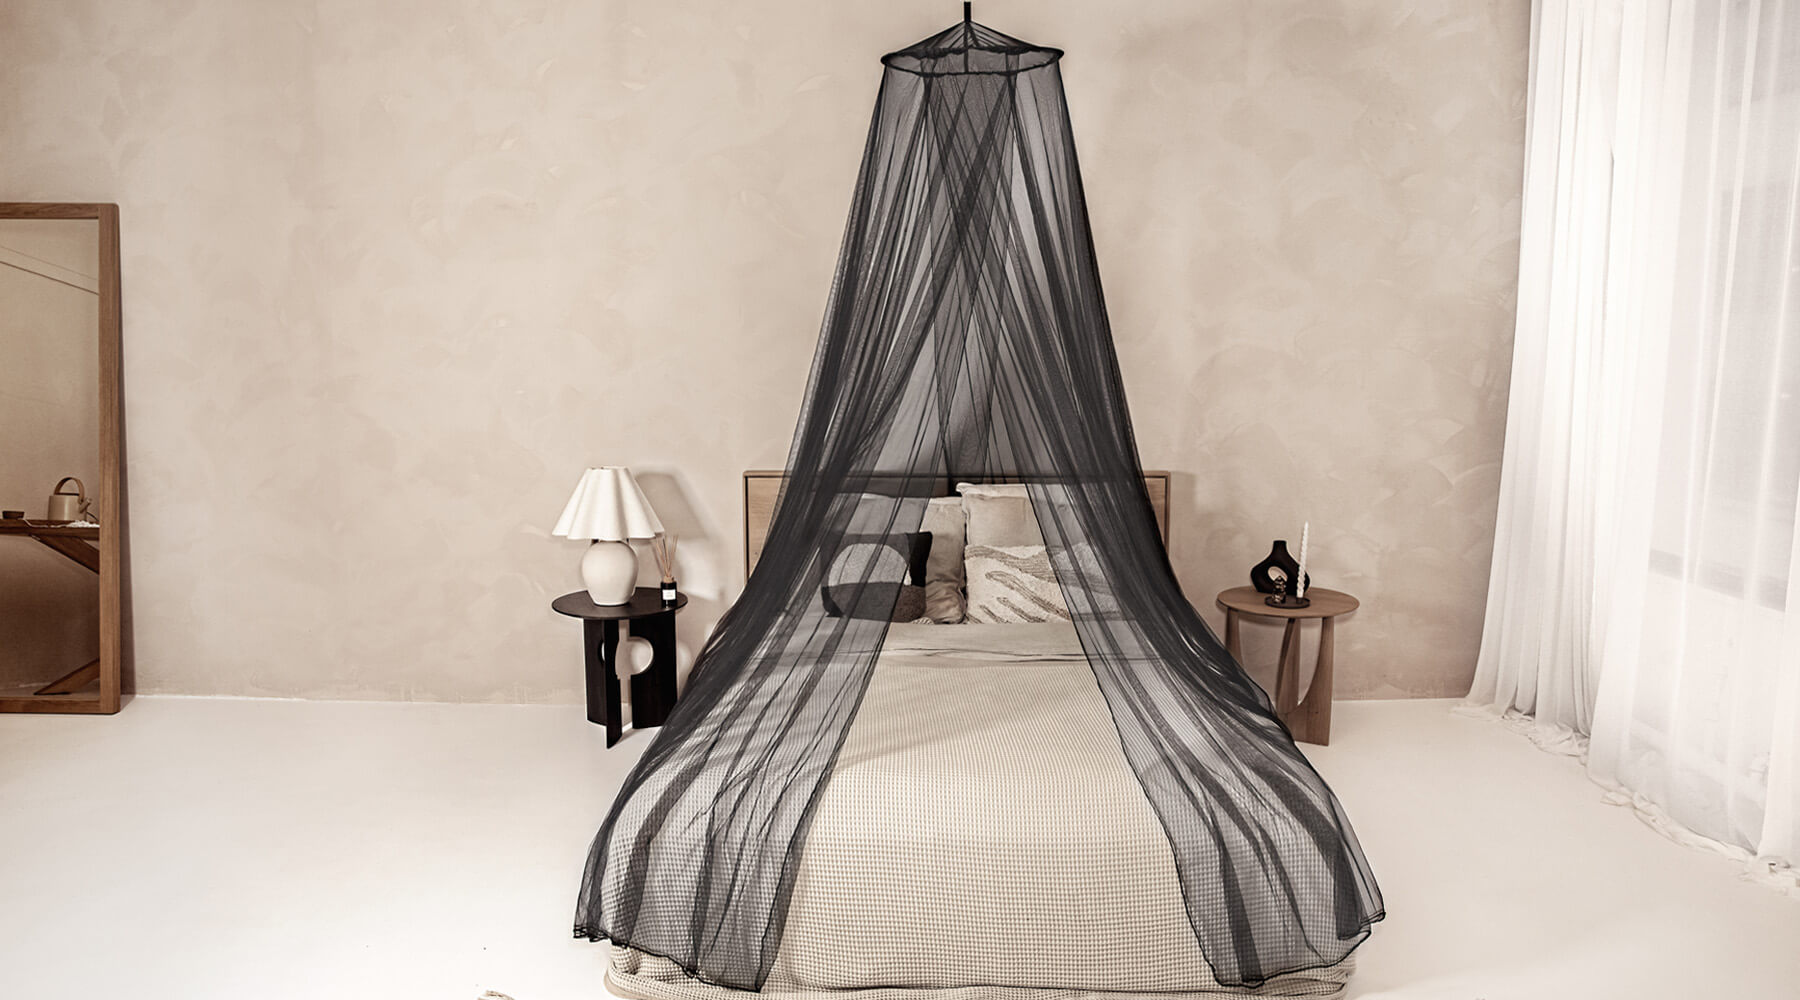 Black mosquito net for bed canopy, round netting for luxury bedroom decoration